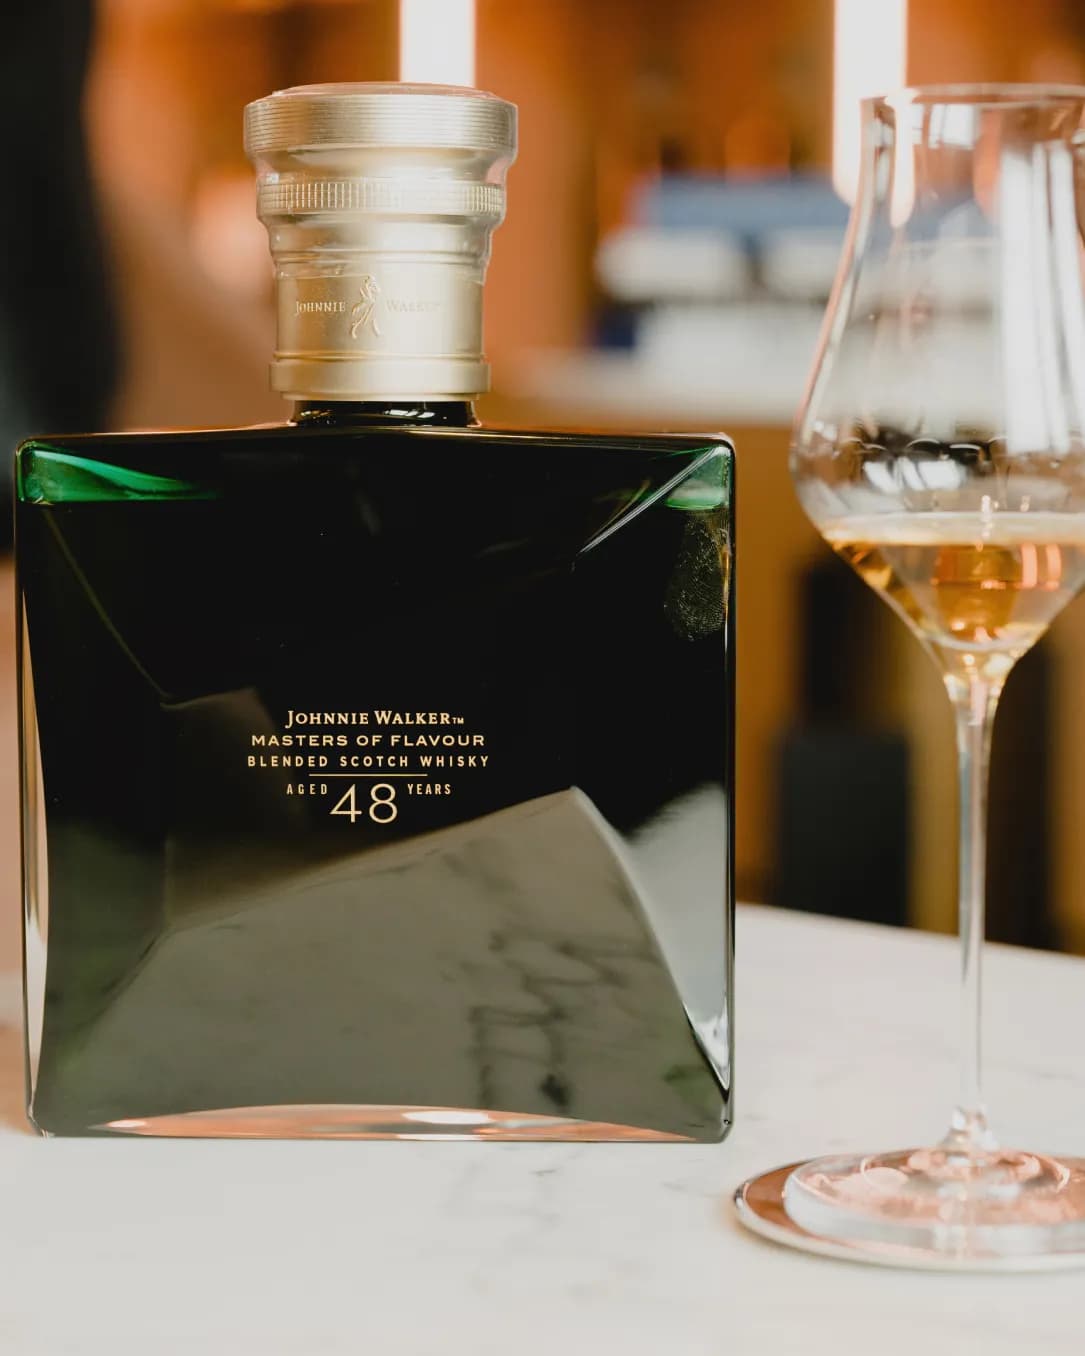 Johnnie Walker Masters of Flavour bottle with a serve